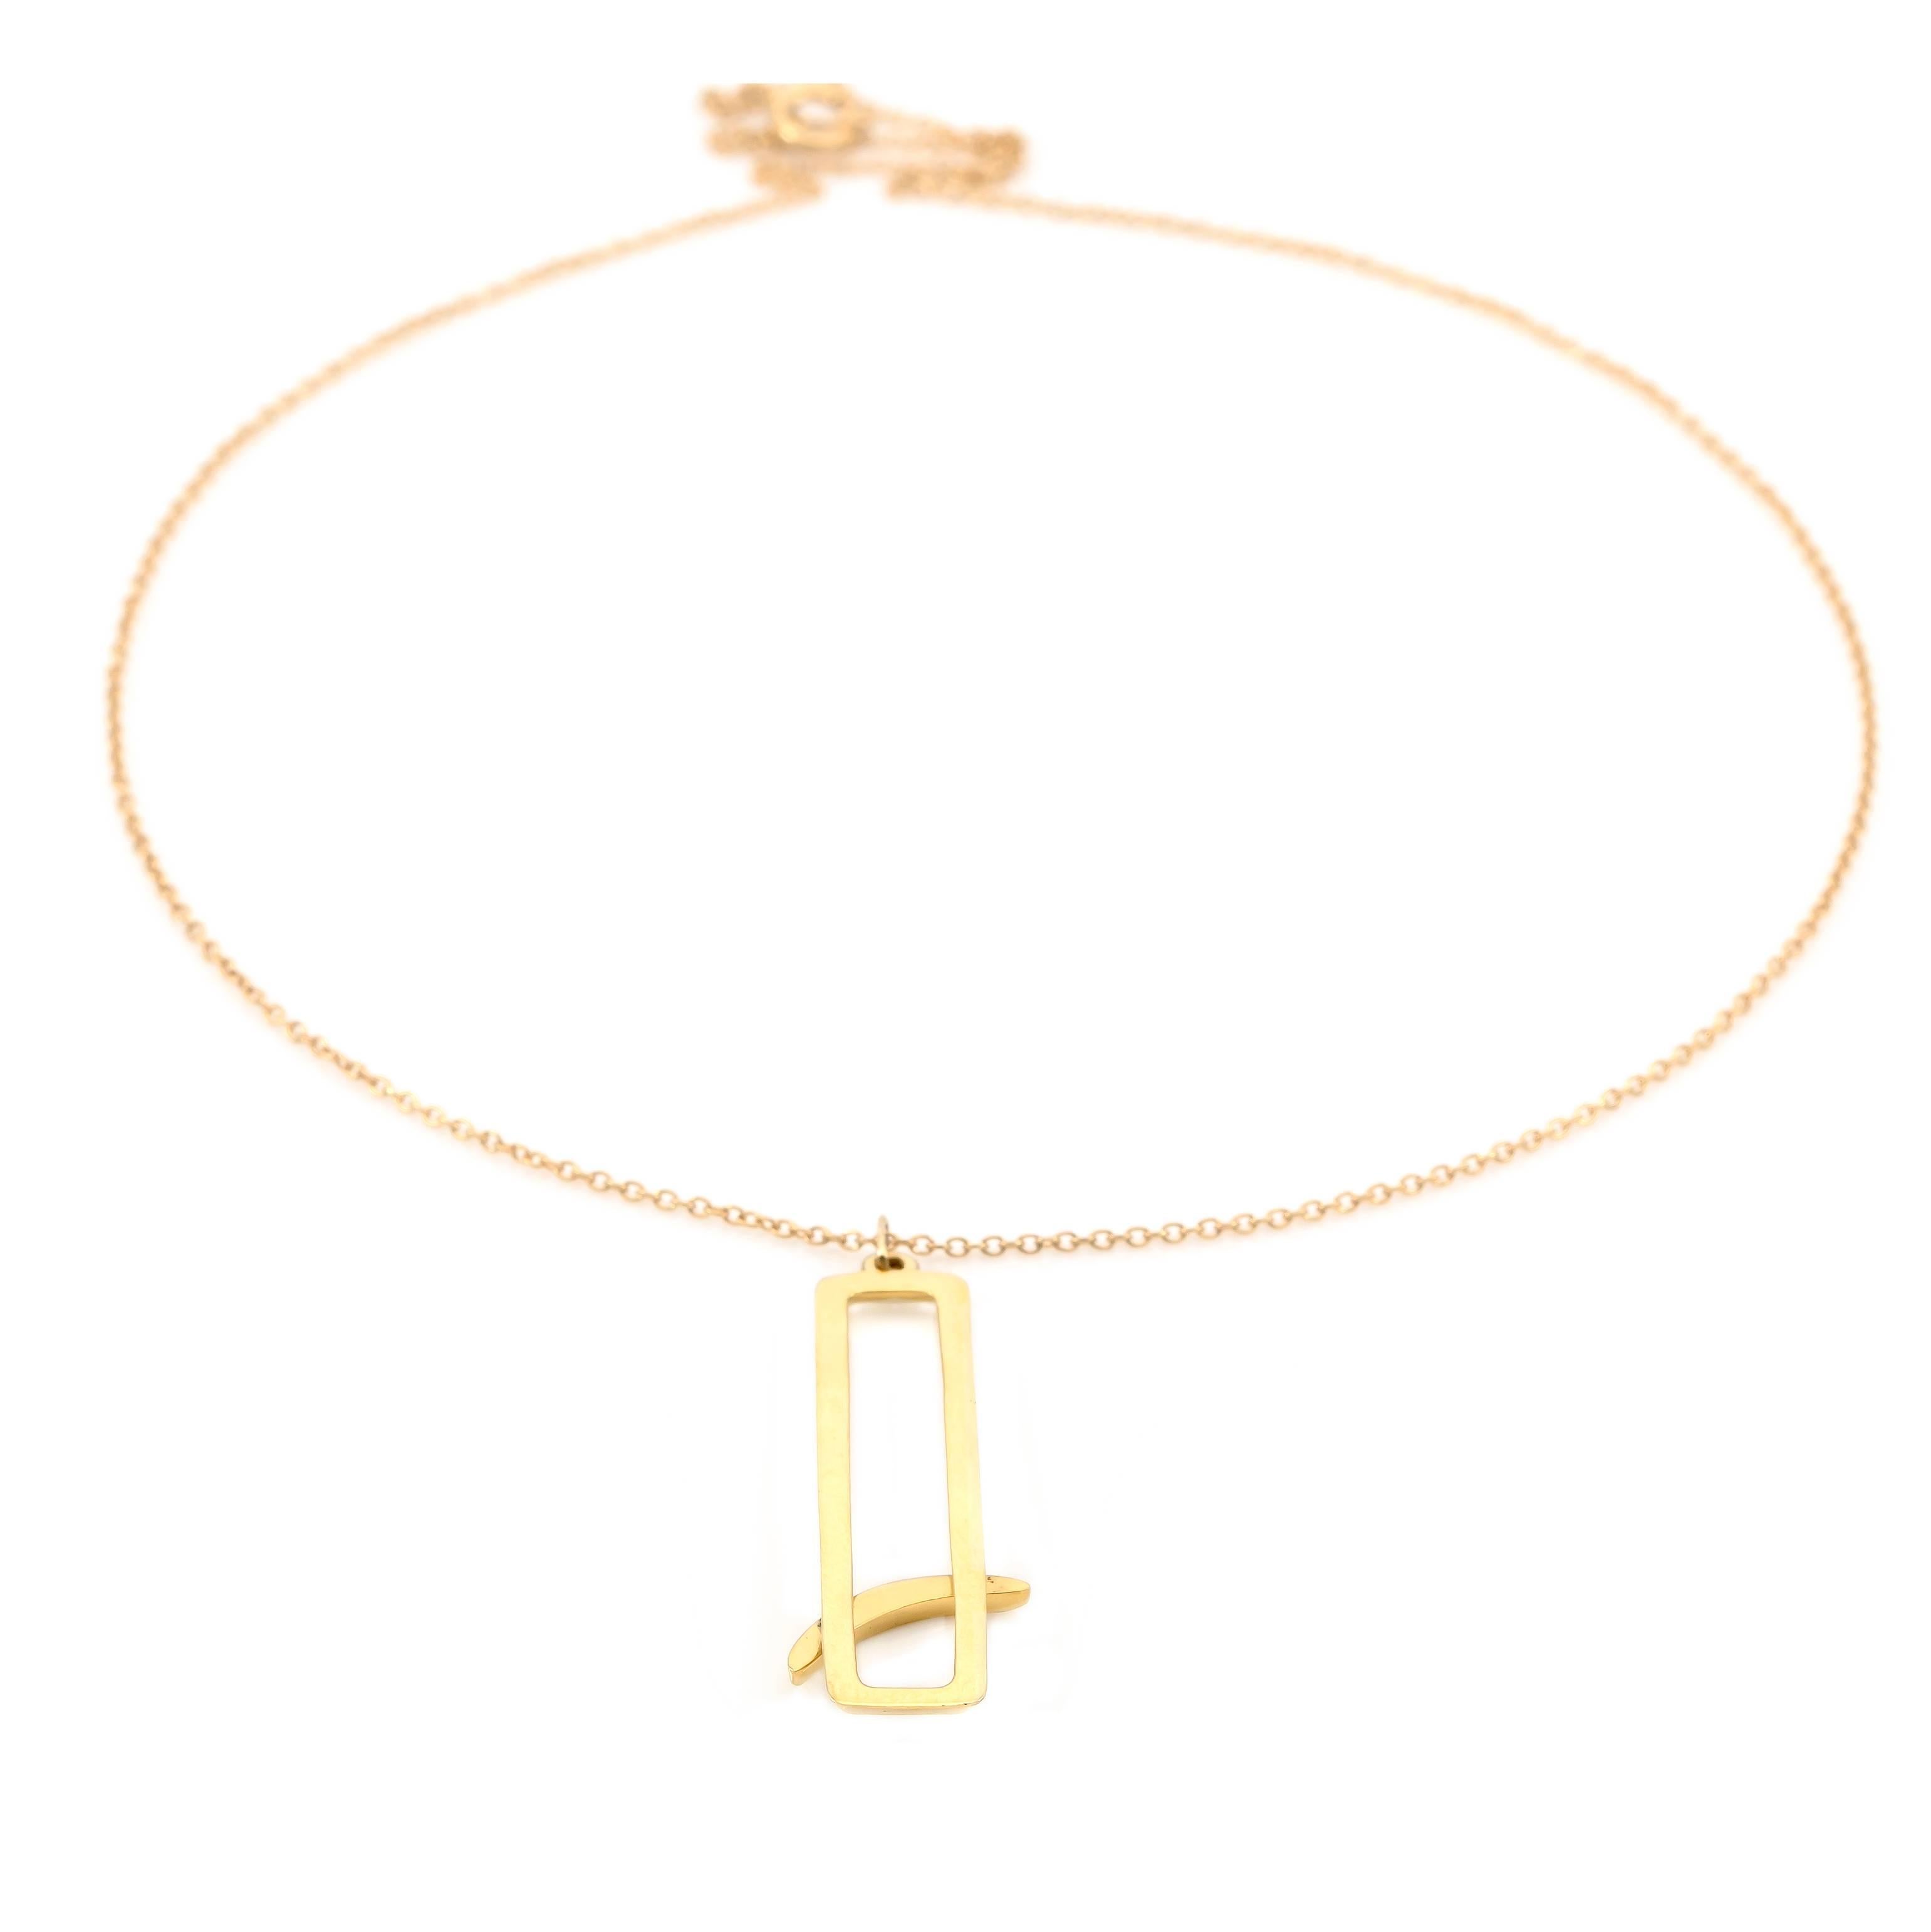 Diamond Geometric Gold Necklace In Excellent Condition For Sale In Berkeley, CA